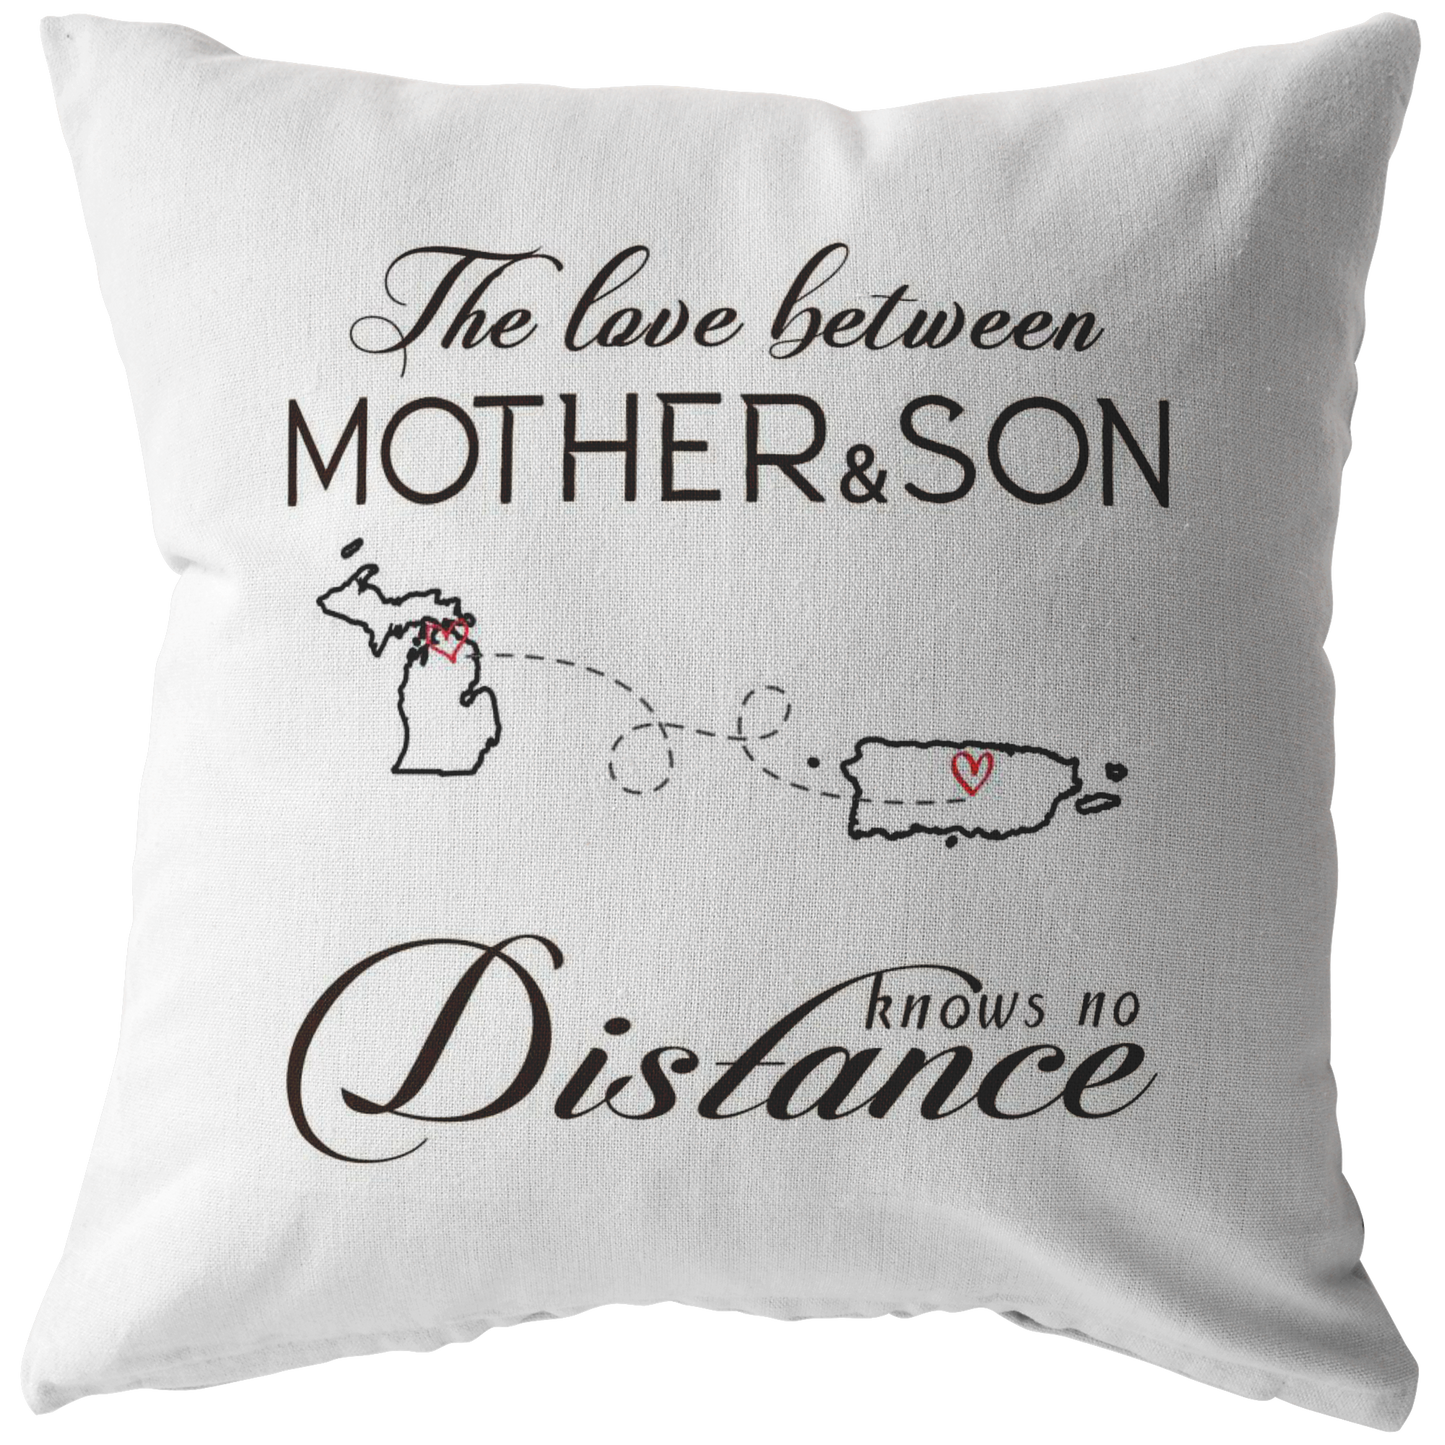 ND-PL21412387-sp-26766 - [ Michigan | Puerto Rico ] (PI_ThrowPillowCovers) Happy Mothers Day Pillow Covers 18x18 - The Love Between Mot